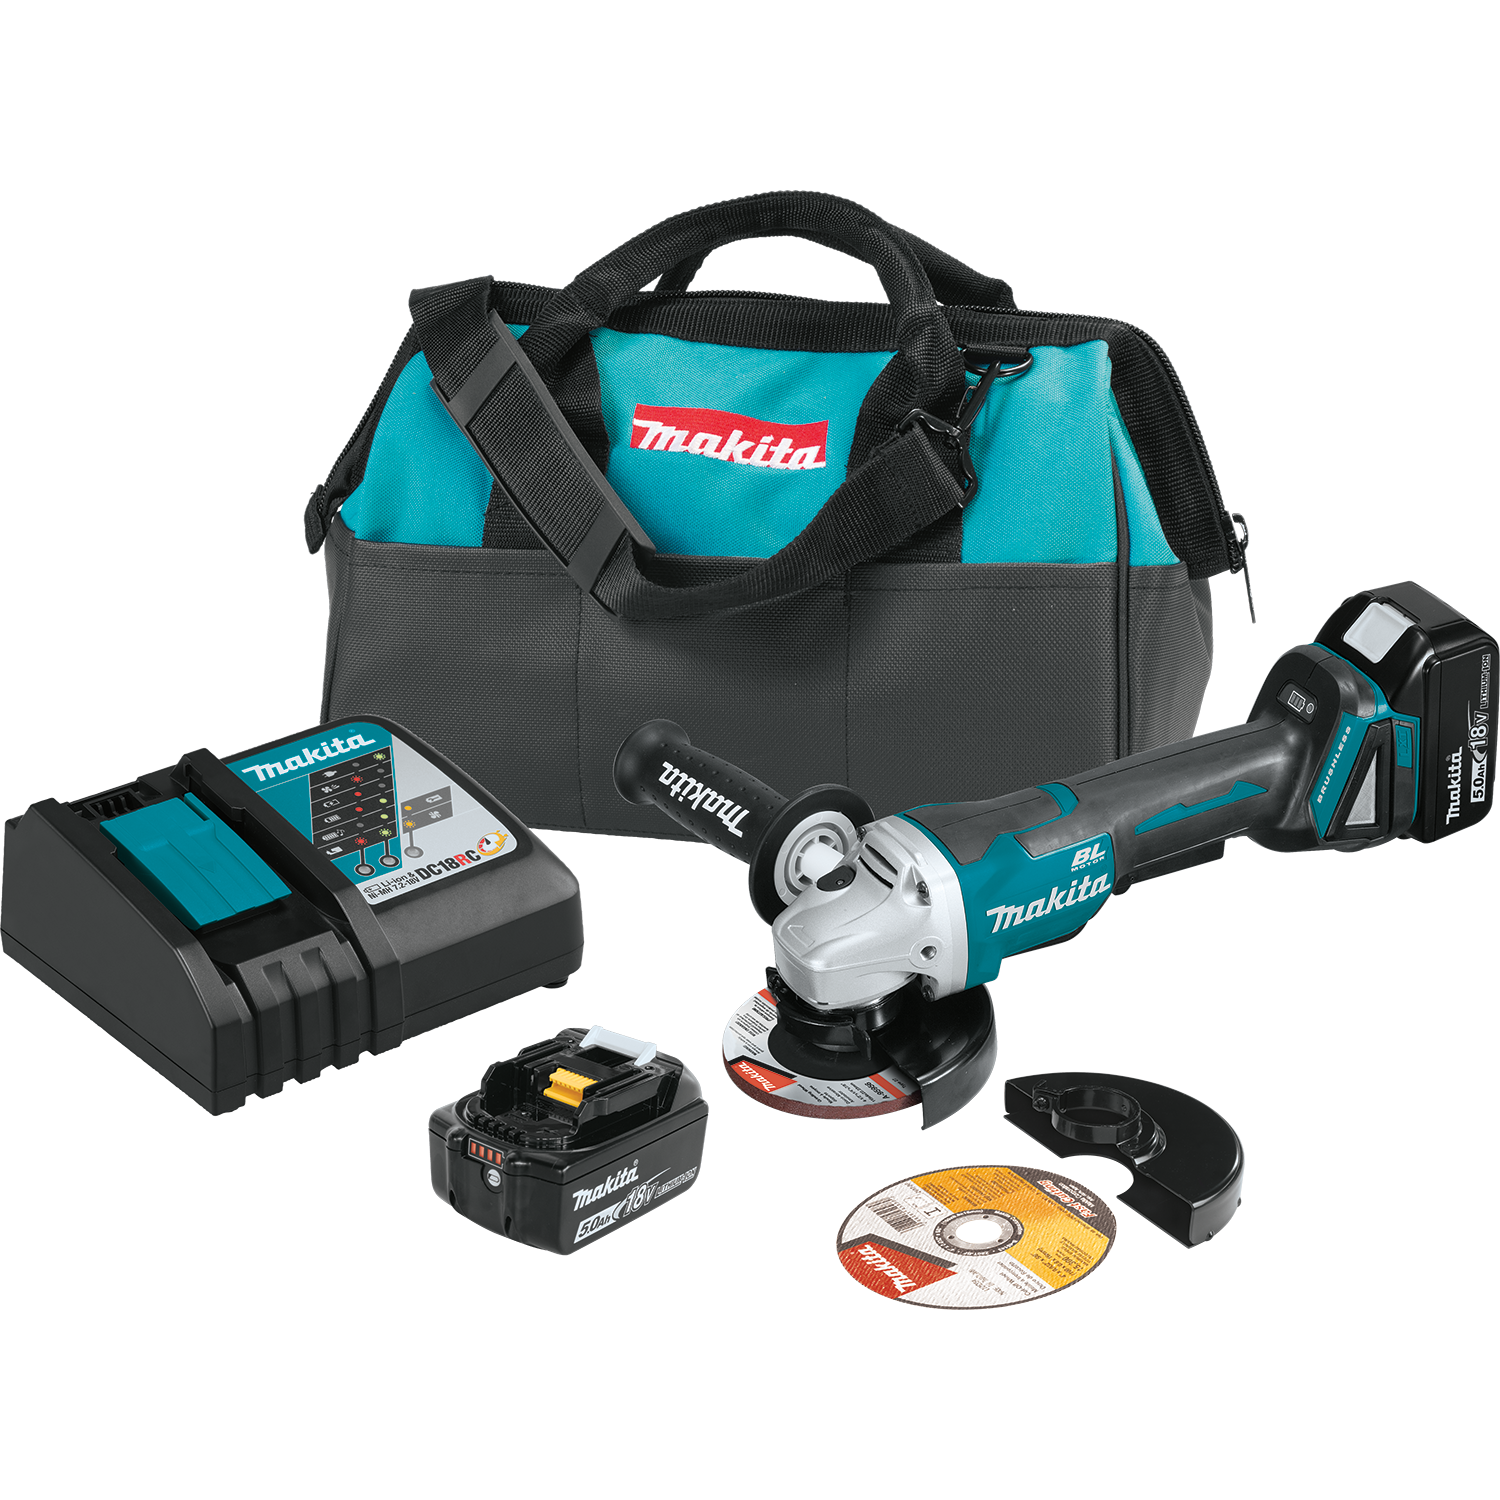 Makita, 18V LXT® Lithium‑Ion Brushless Cordless 4‑1/2” / 5" Paddle Switch Cut‑Off/Angle Grinder Kit, with Electric Brake (5.0Ah) - XAG11T